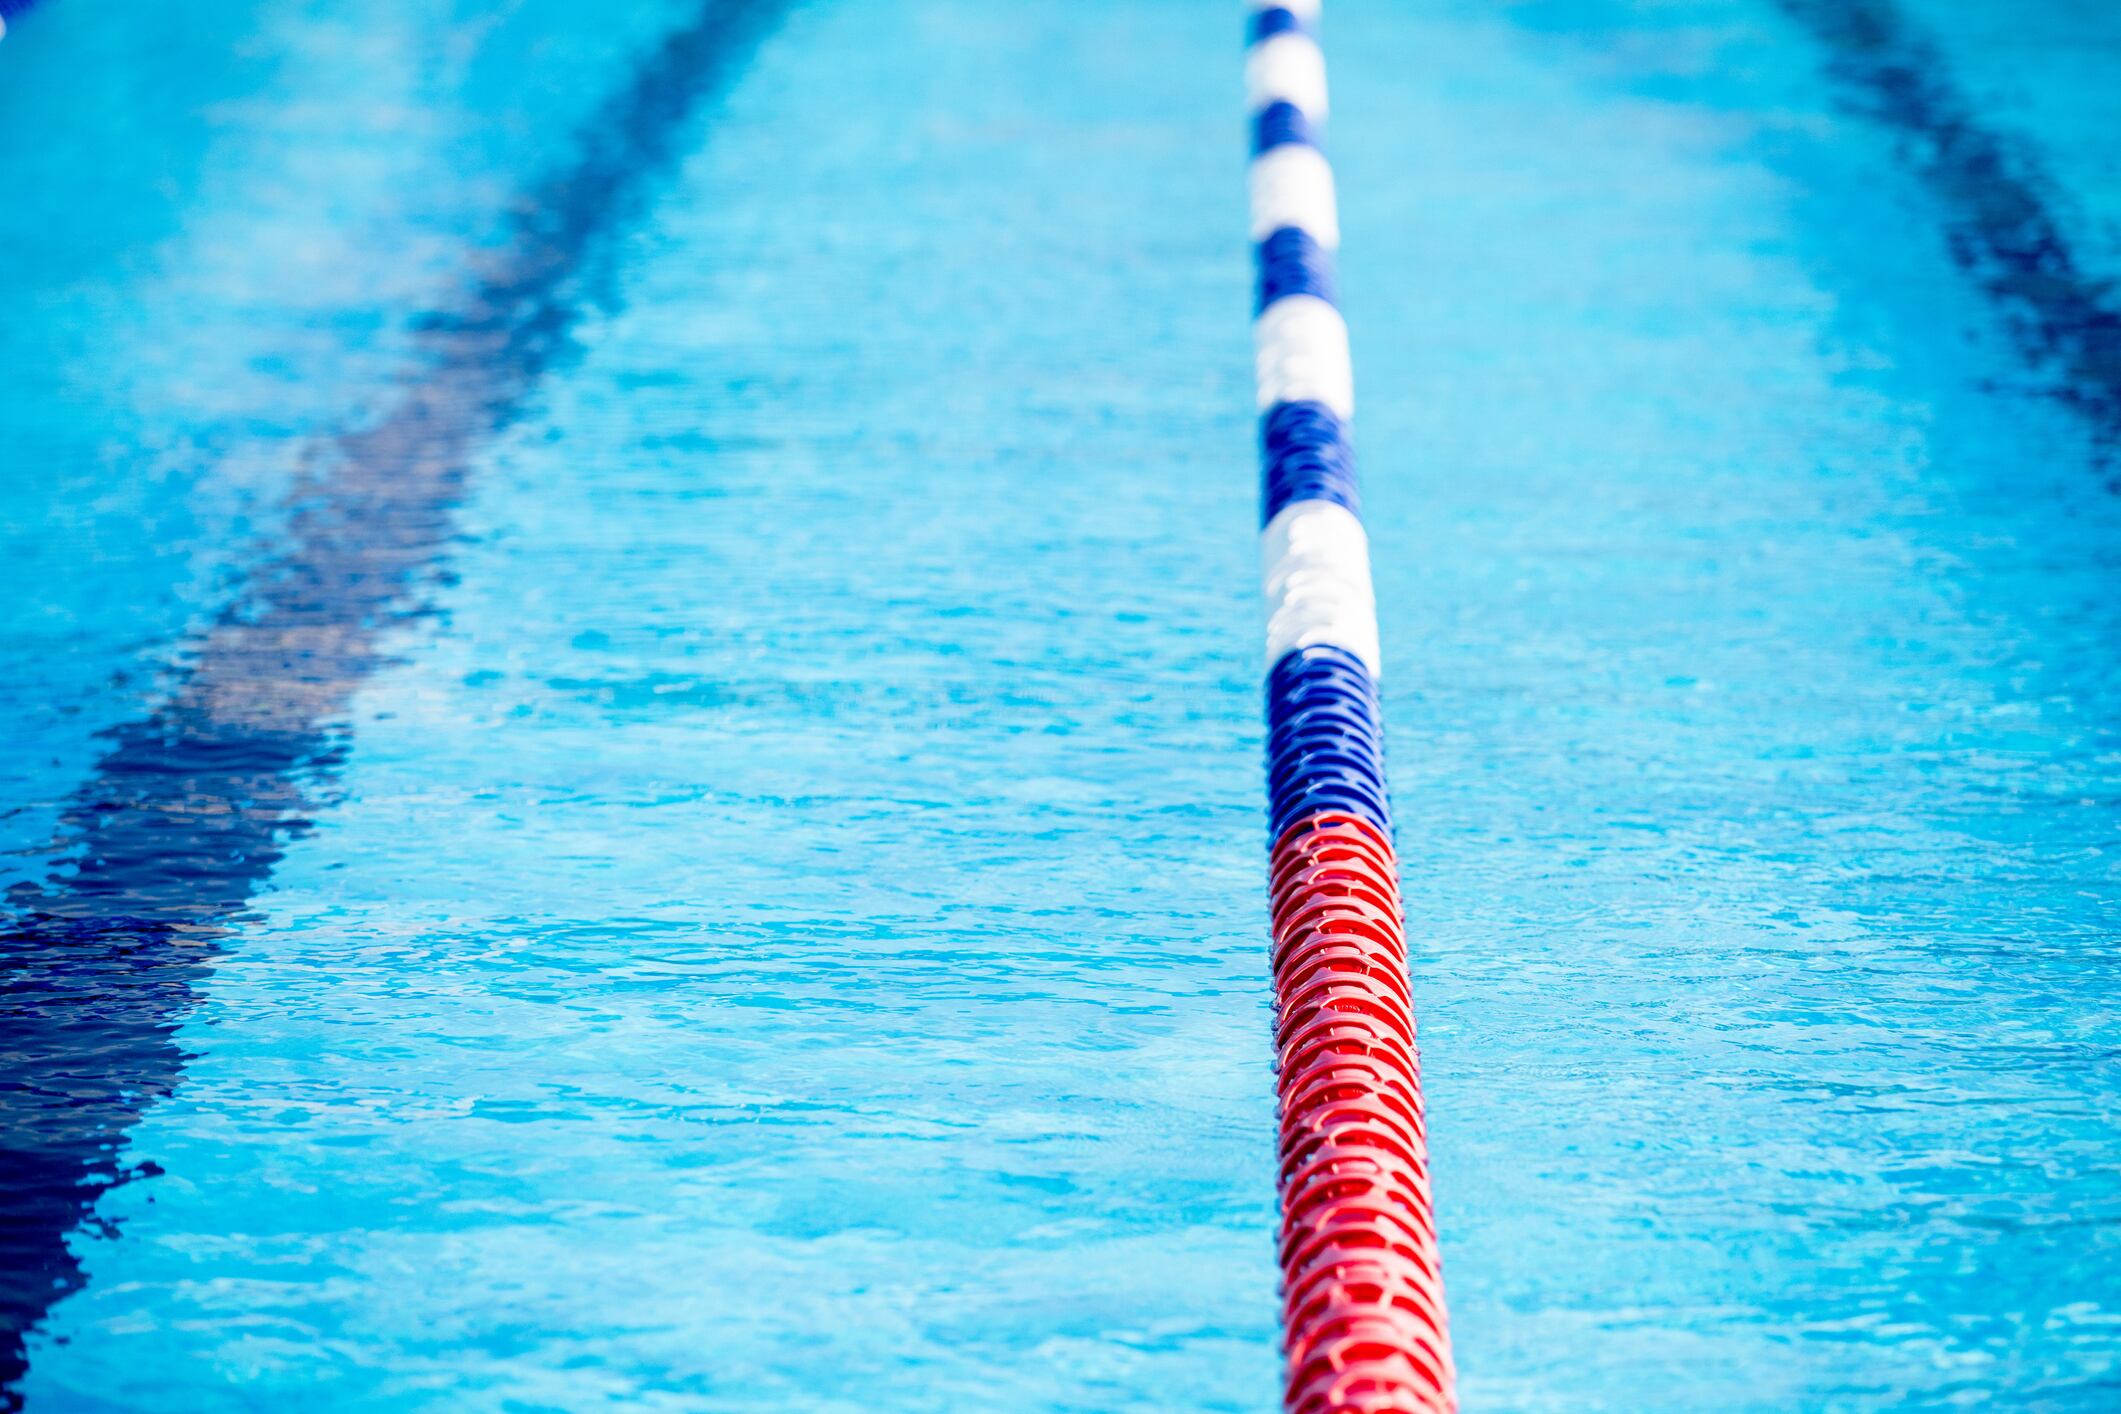 A swimming pool lane marked by blue, red, white dividers. 